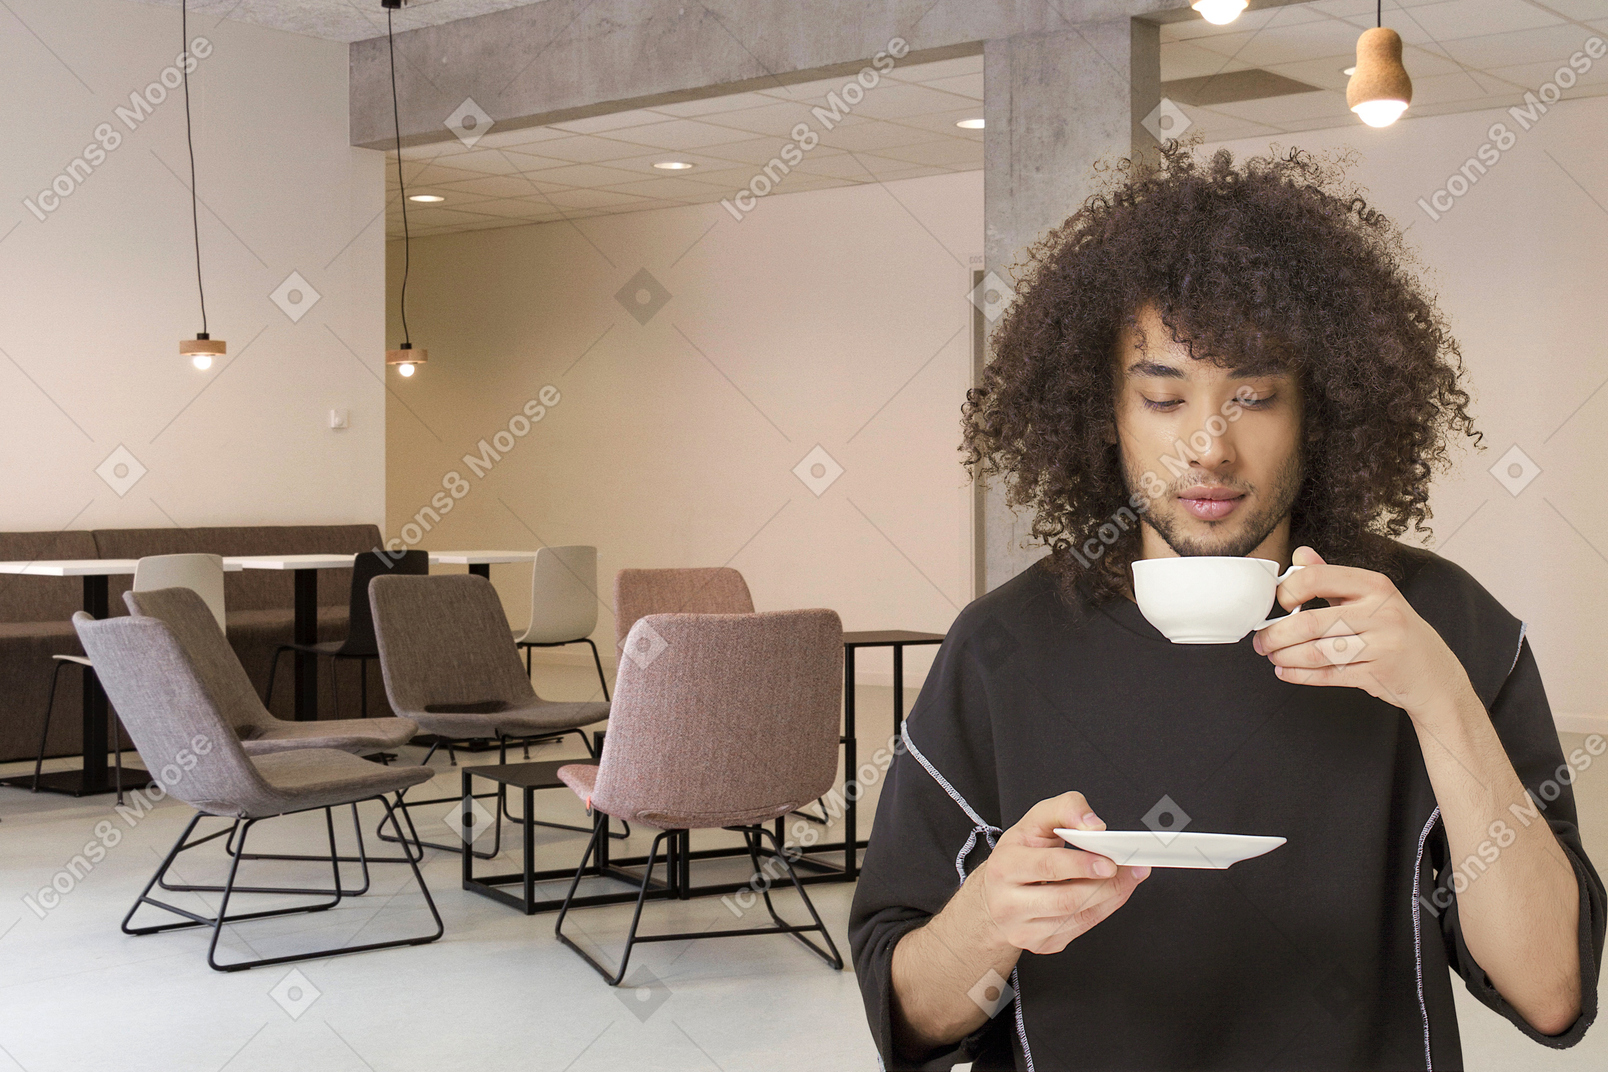 A man drinking a cup of coffee in a conference room